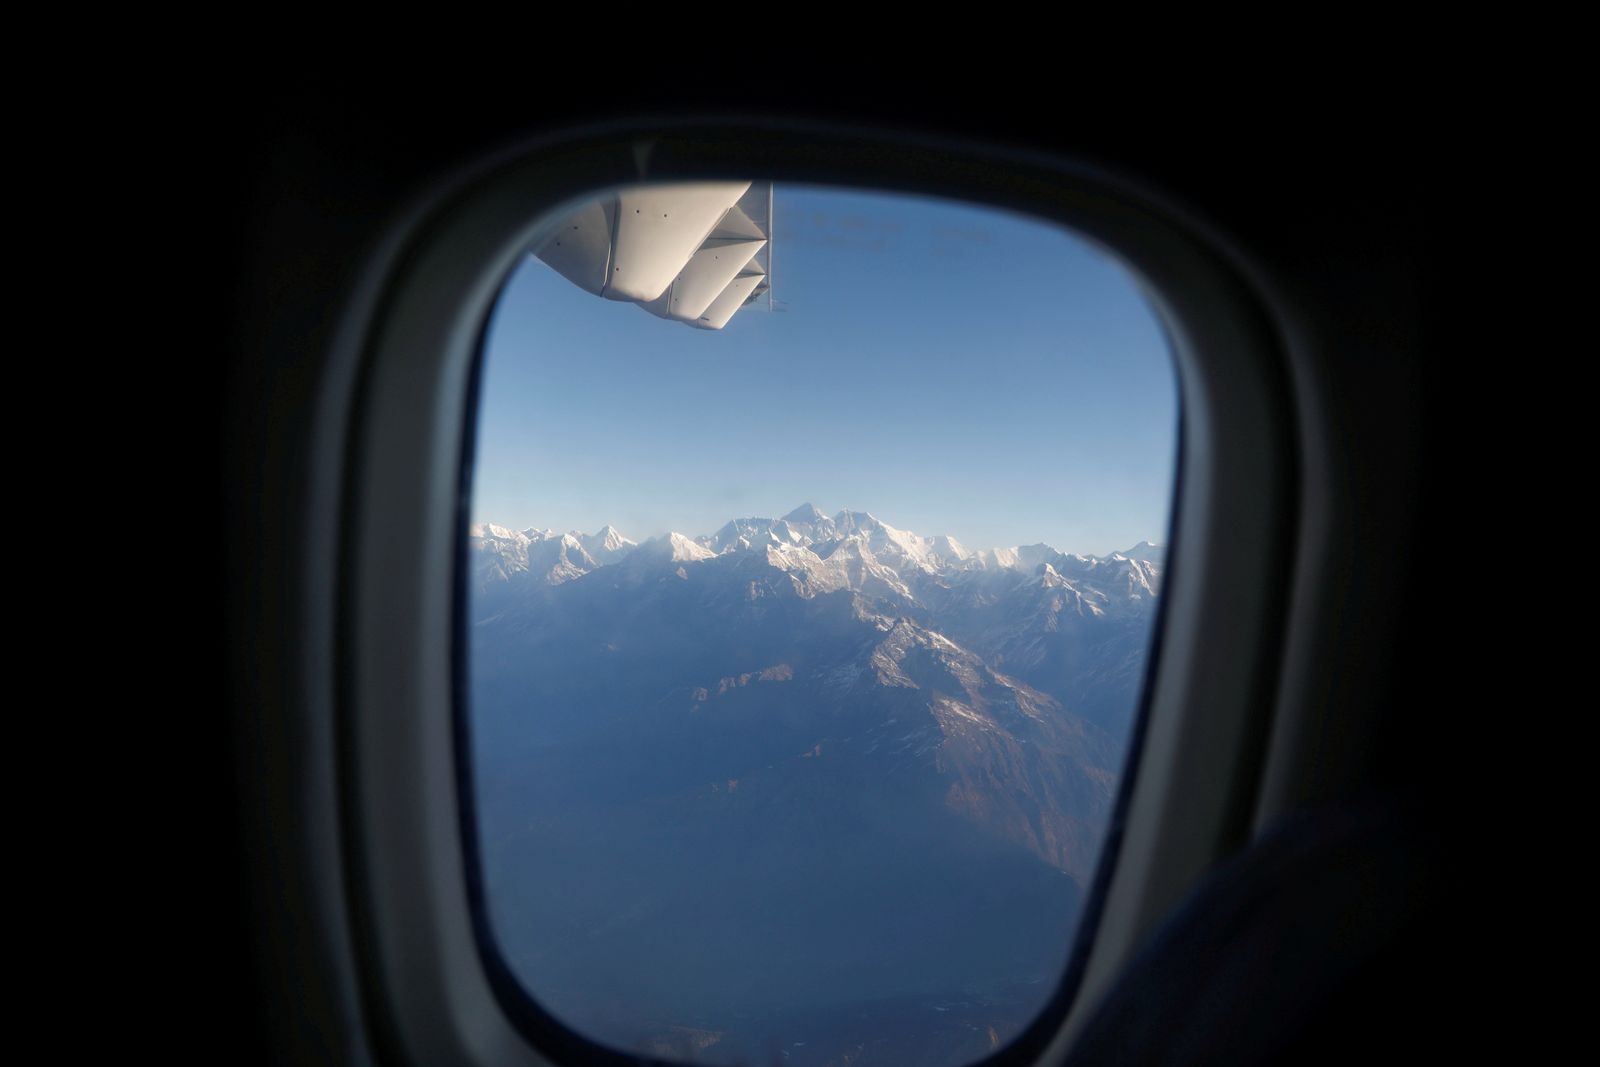 FILE PHOTO: Mount Everest, the world highest peak, and other peaks of the Himalayan range are seen through an aircraft window during a mountain flight from Kathmandu - REUTERS